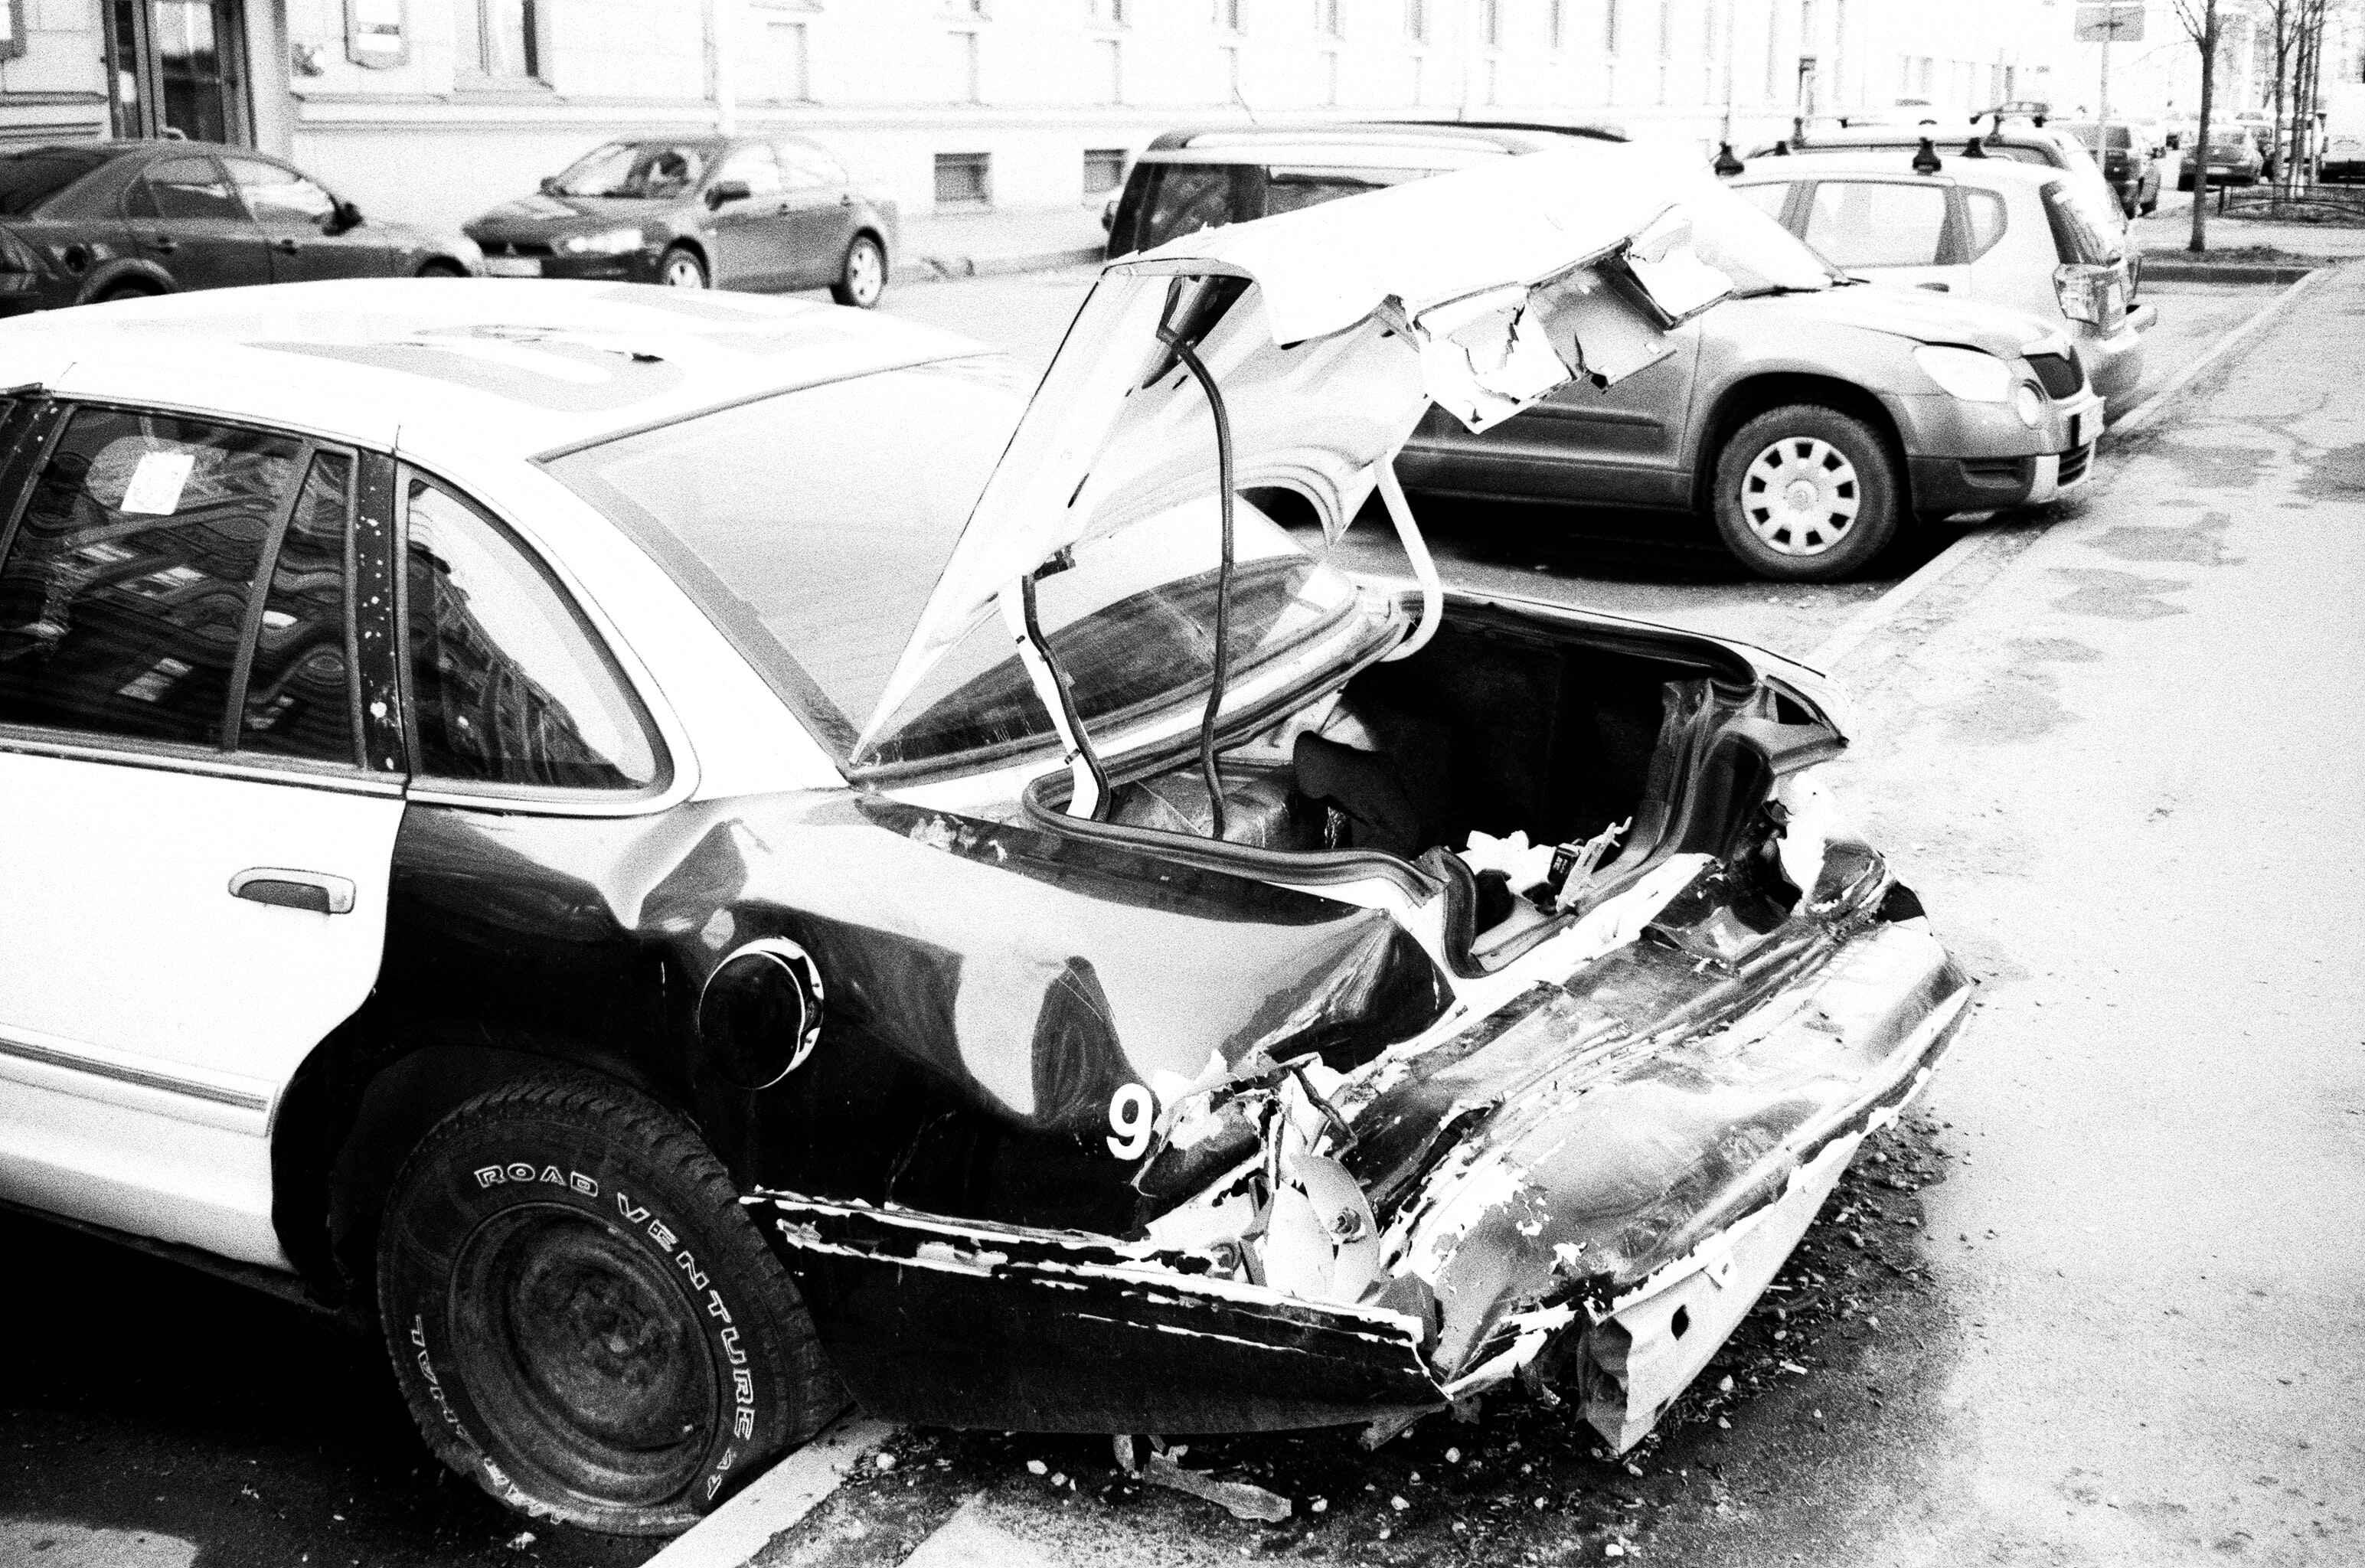 Smashed vehicle in parking lot